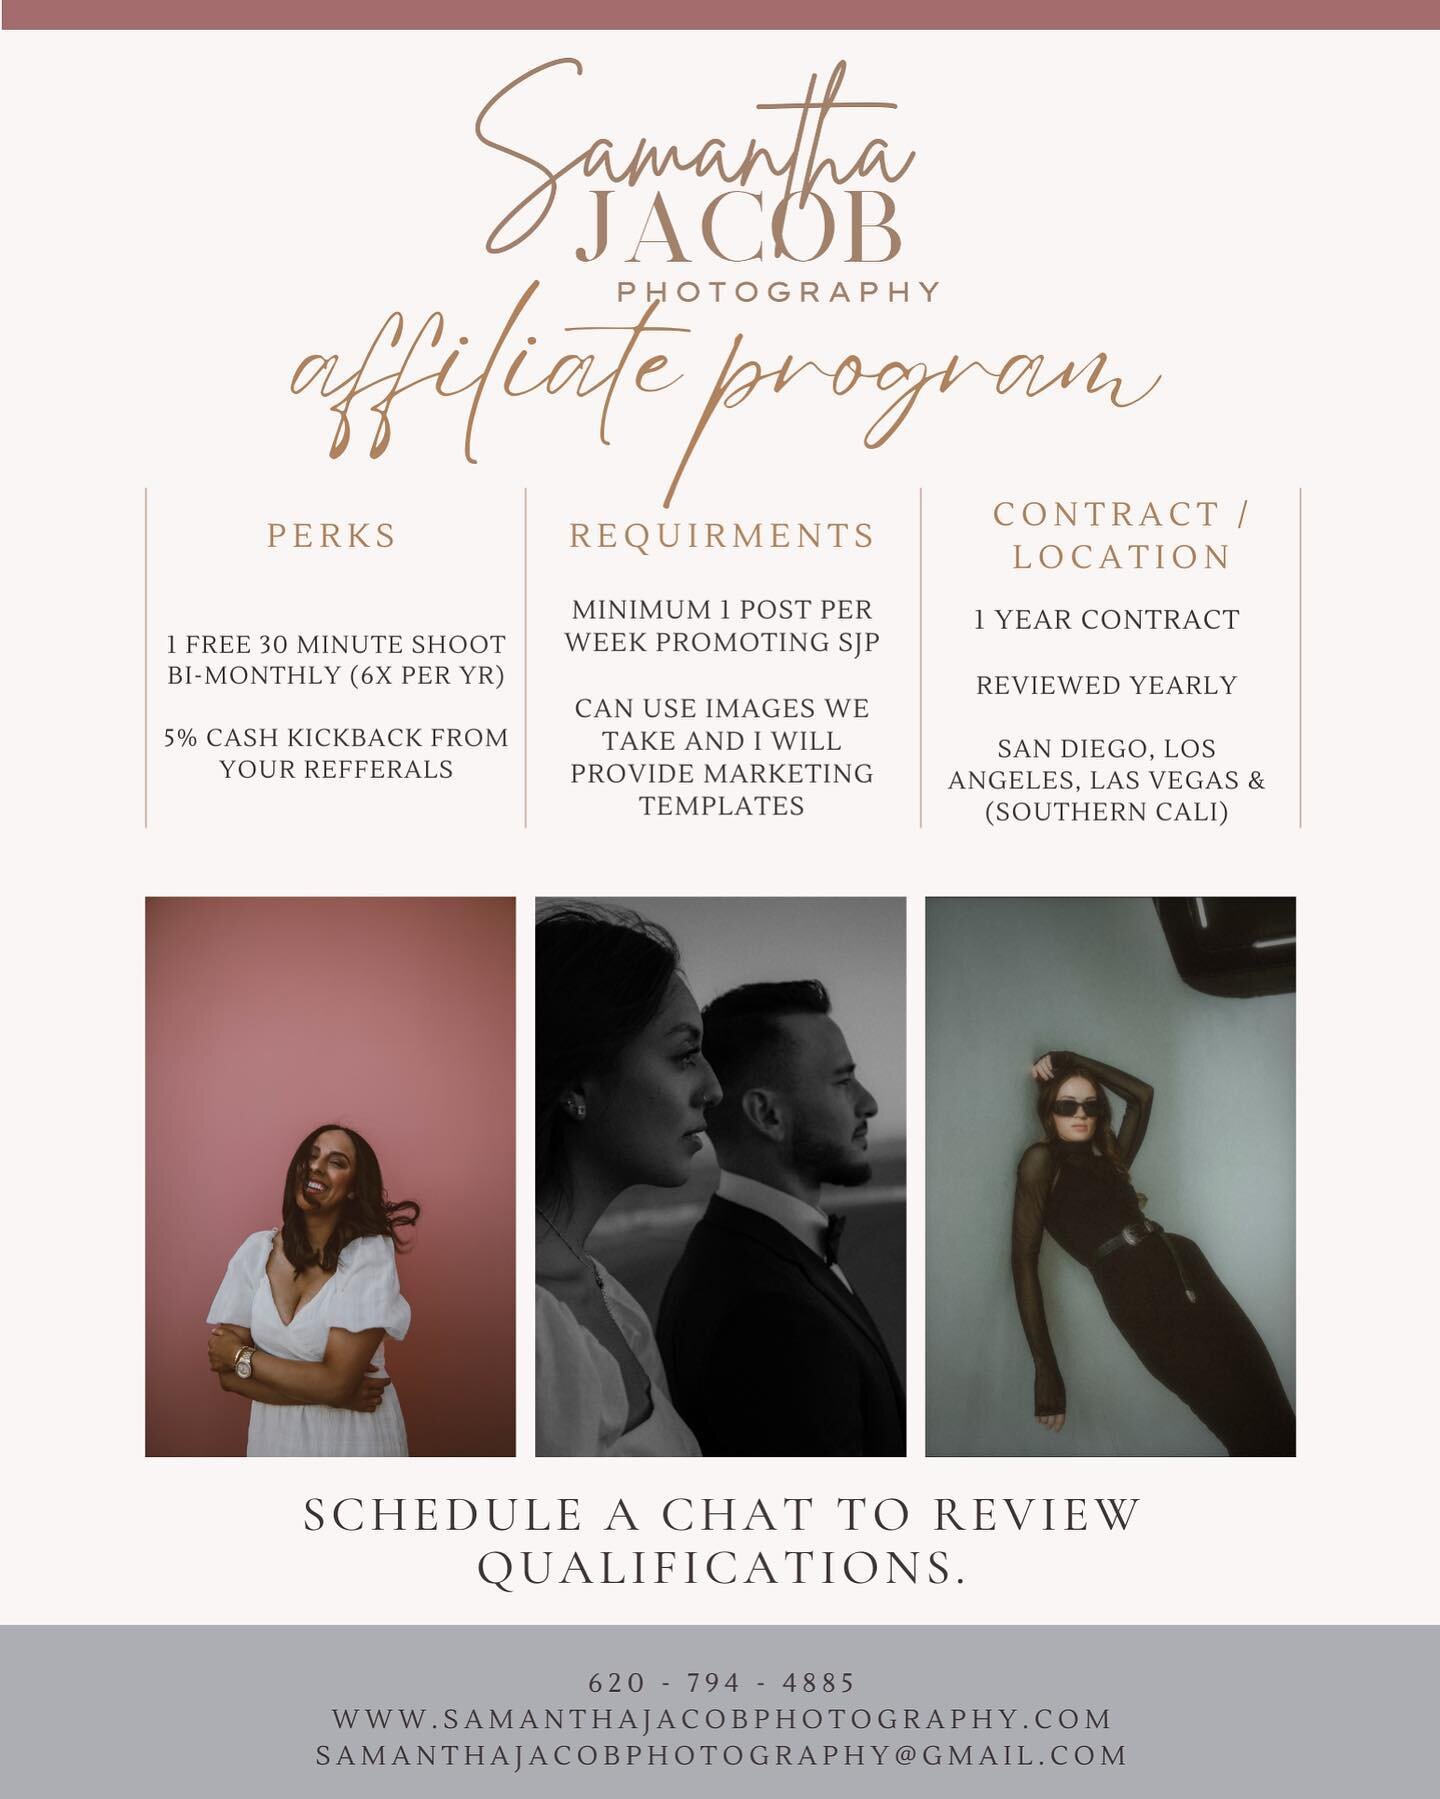 🚨 ATTENTION 🚨 
@samanthajacobphotography AFFILIATE PROGRAM IS NOW OPEN!

✨ What&rsquo;s the SJP affiliate program? Glad you asked. This program is a mutually beneficial program. 
An SJP affiliate will recieve:
- free 30 minute photoshoot bi-monthly